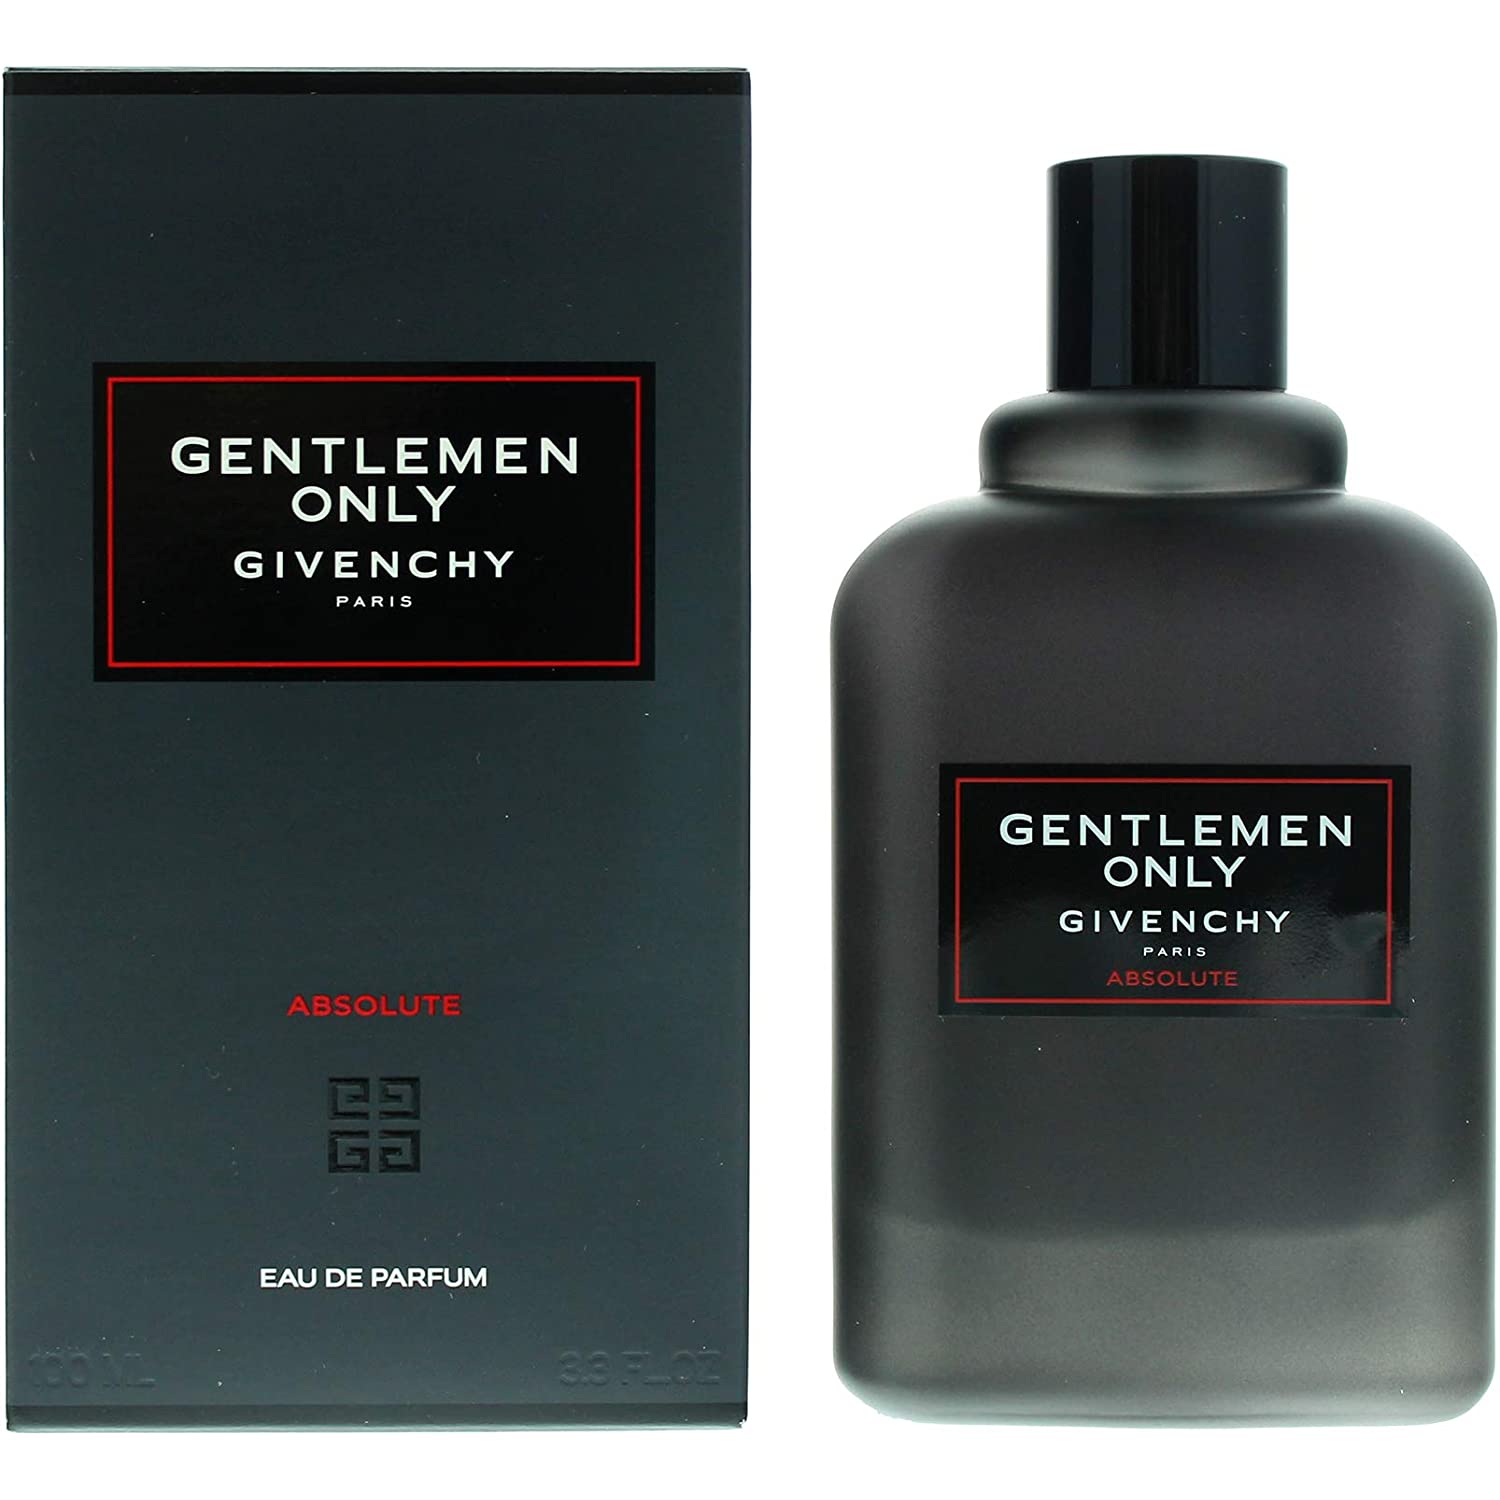 Givenchy Gentlemen Only Absolute - perfume for men (100 ml) Givenchy